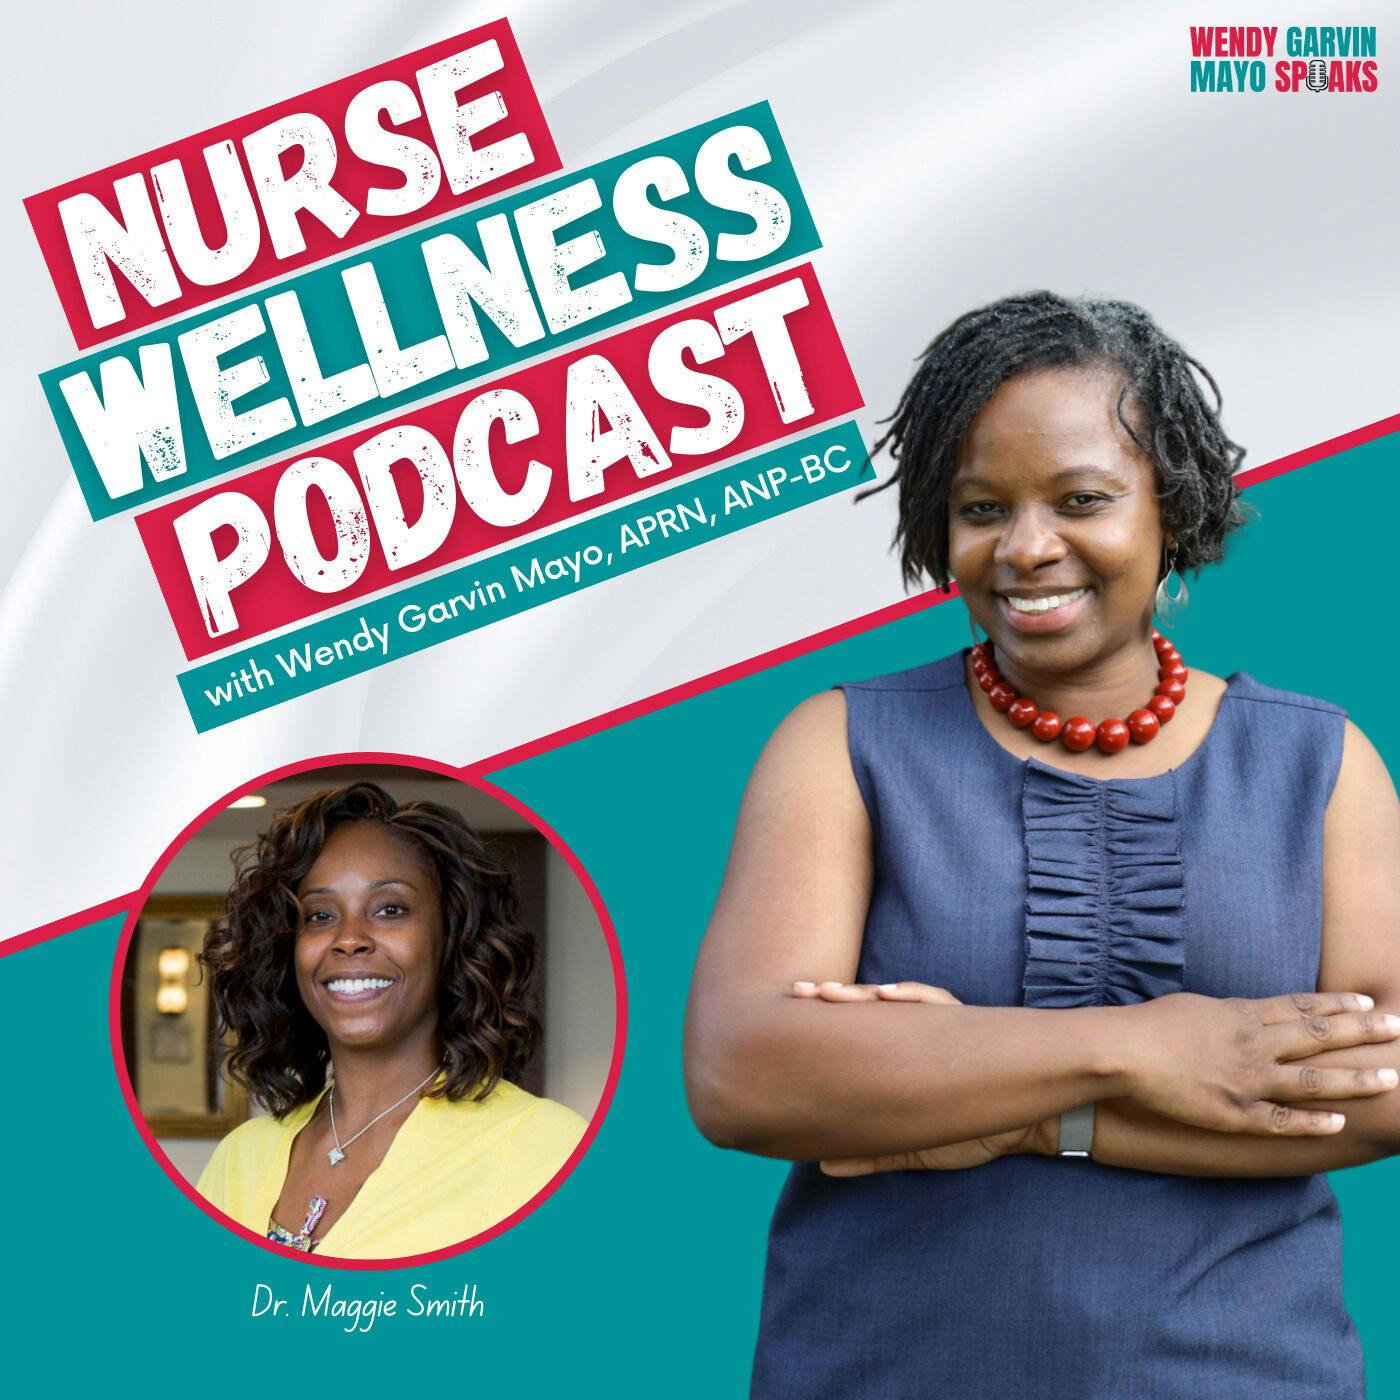 NWP: From Bedside to Corporate Leadership: Wendy with Dr. Maggie Smith